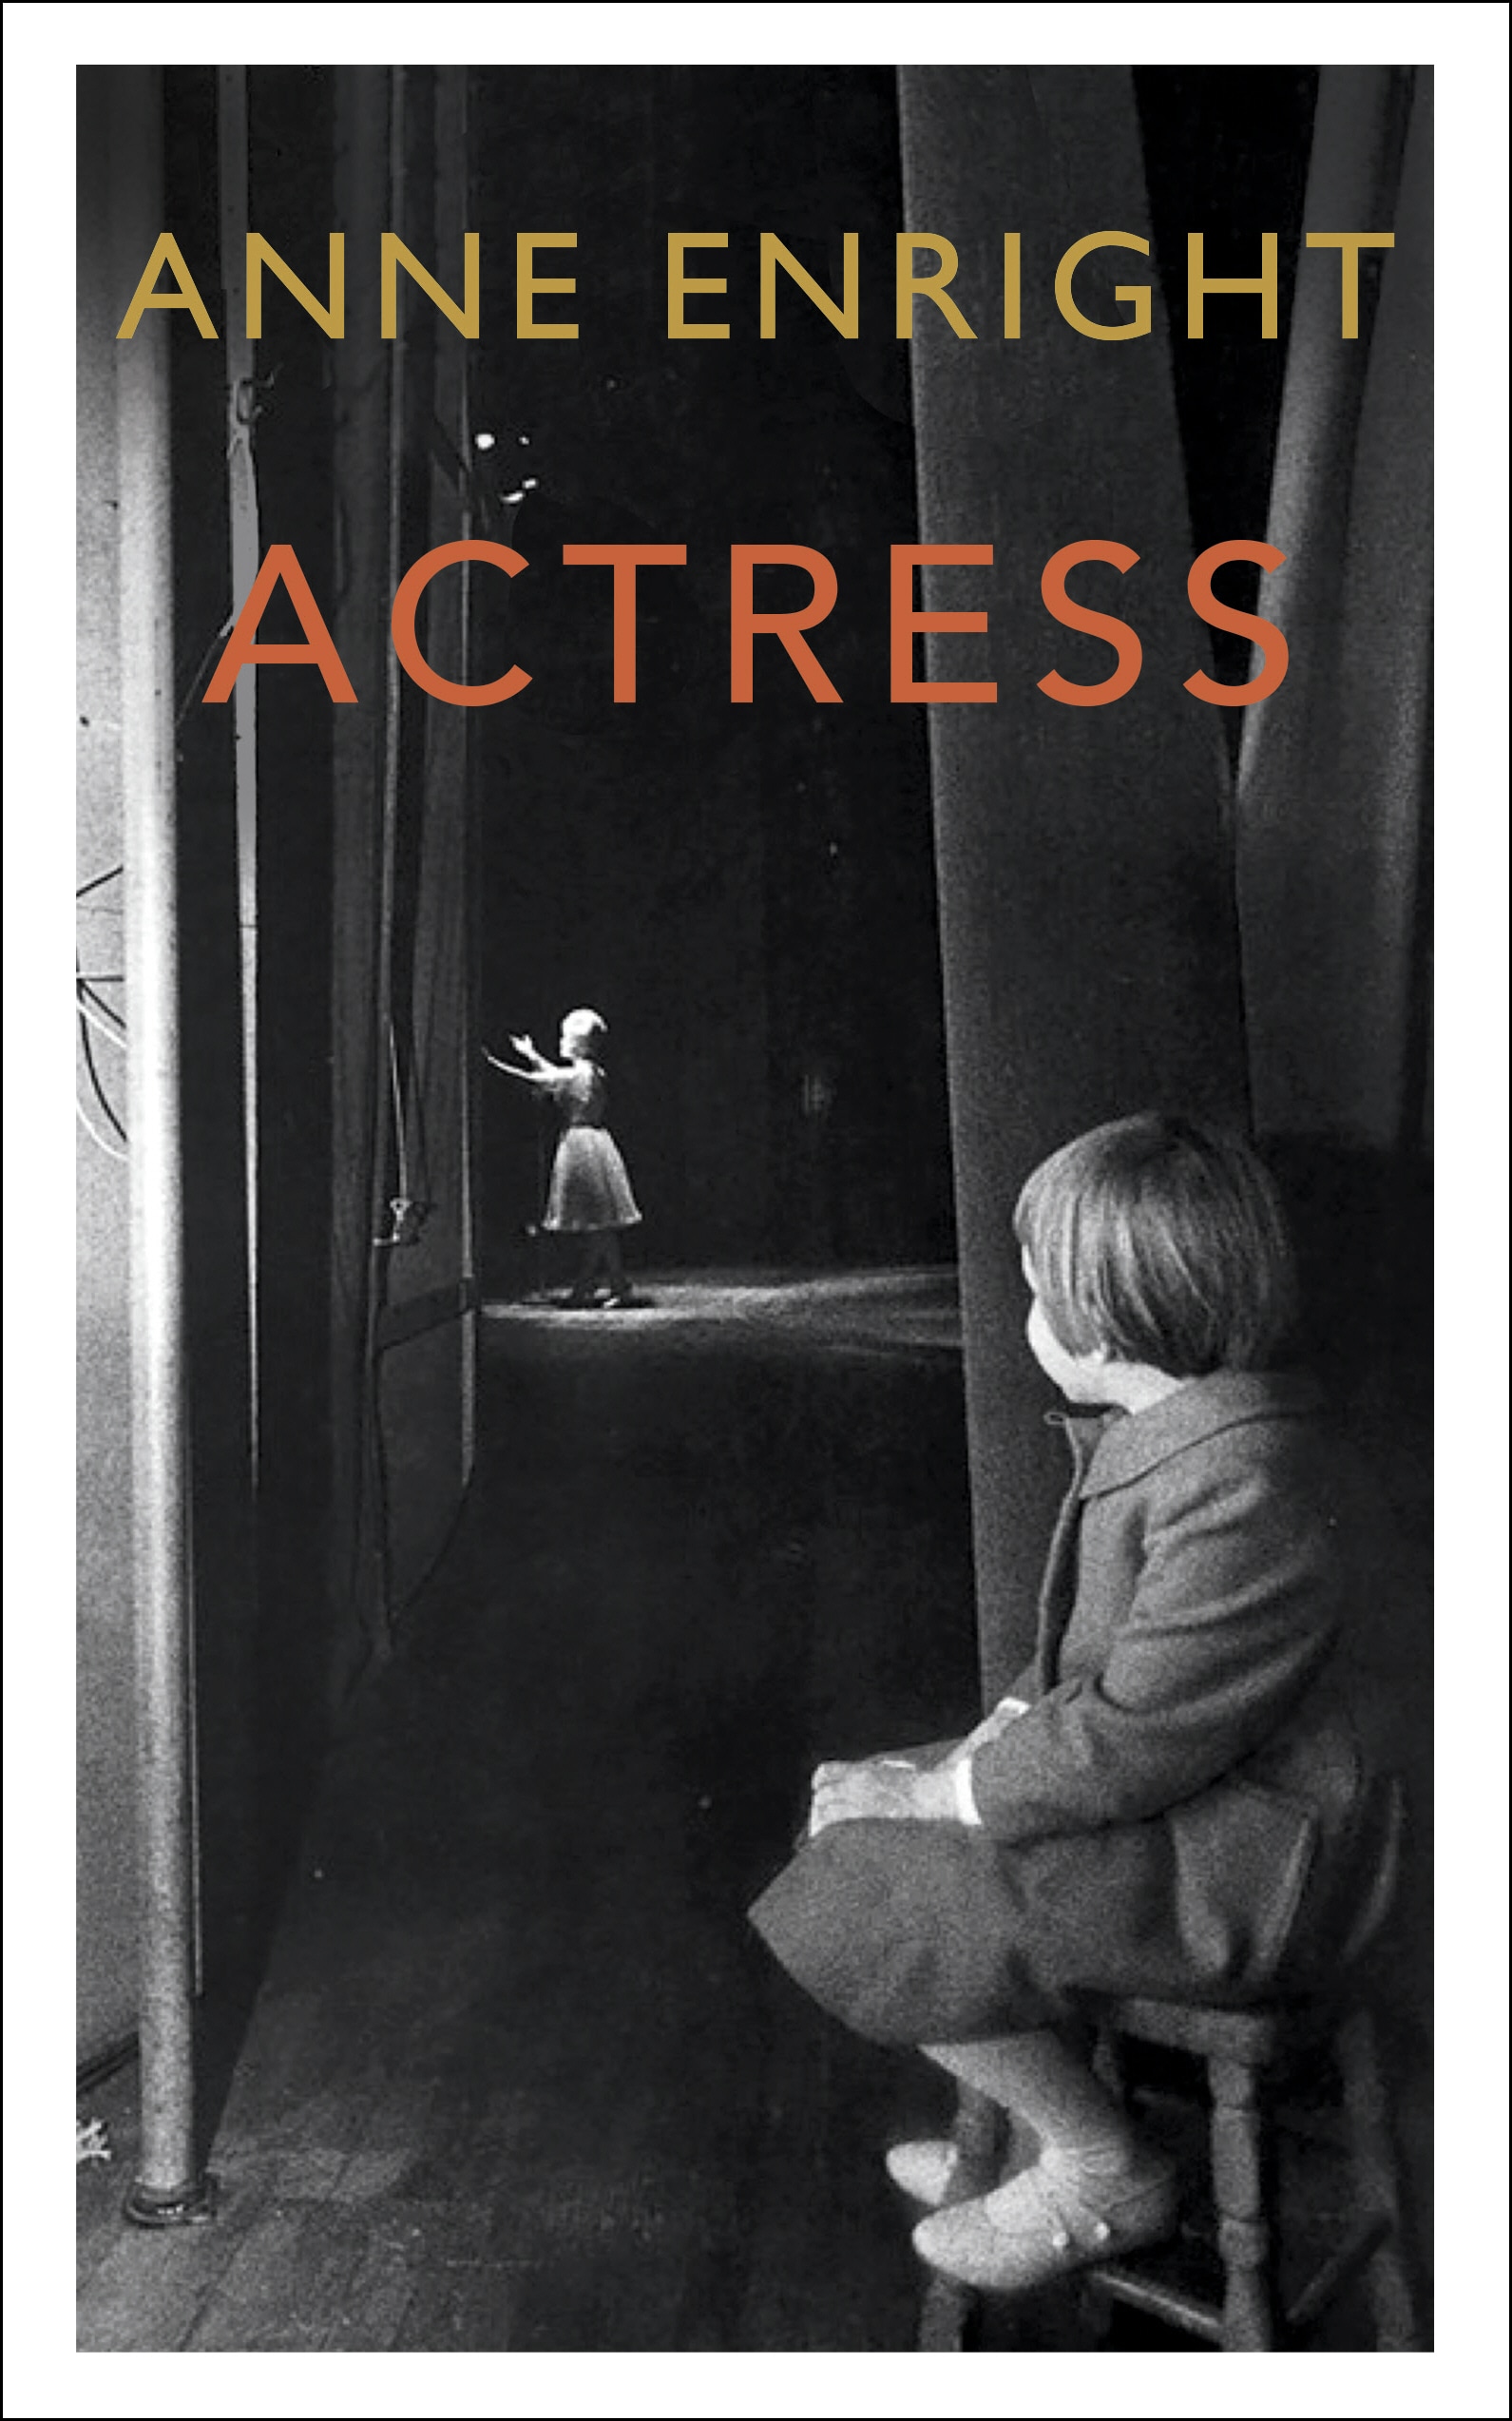 Book “Actress” by Anne Enright — February 20, 2020